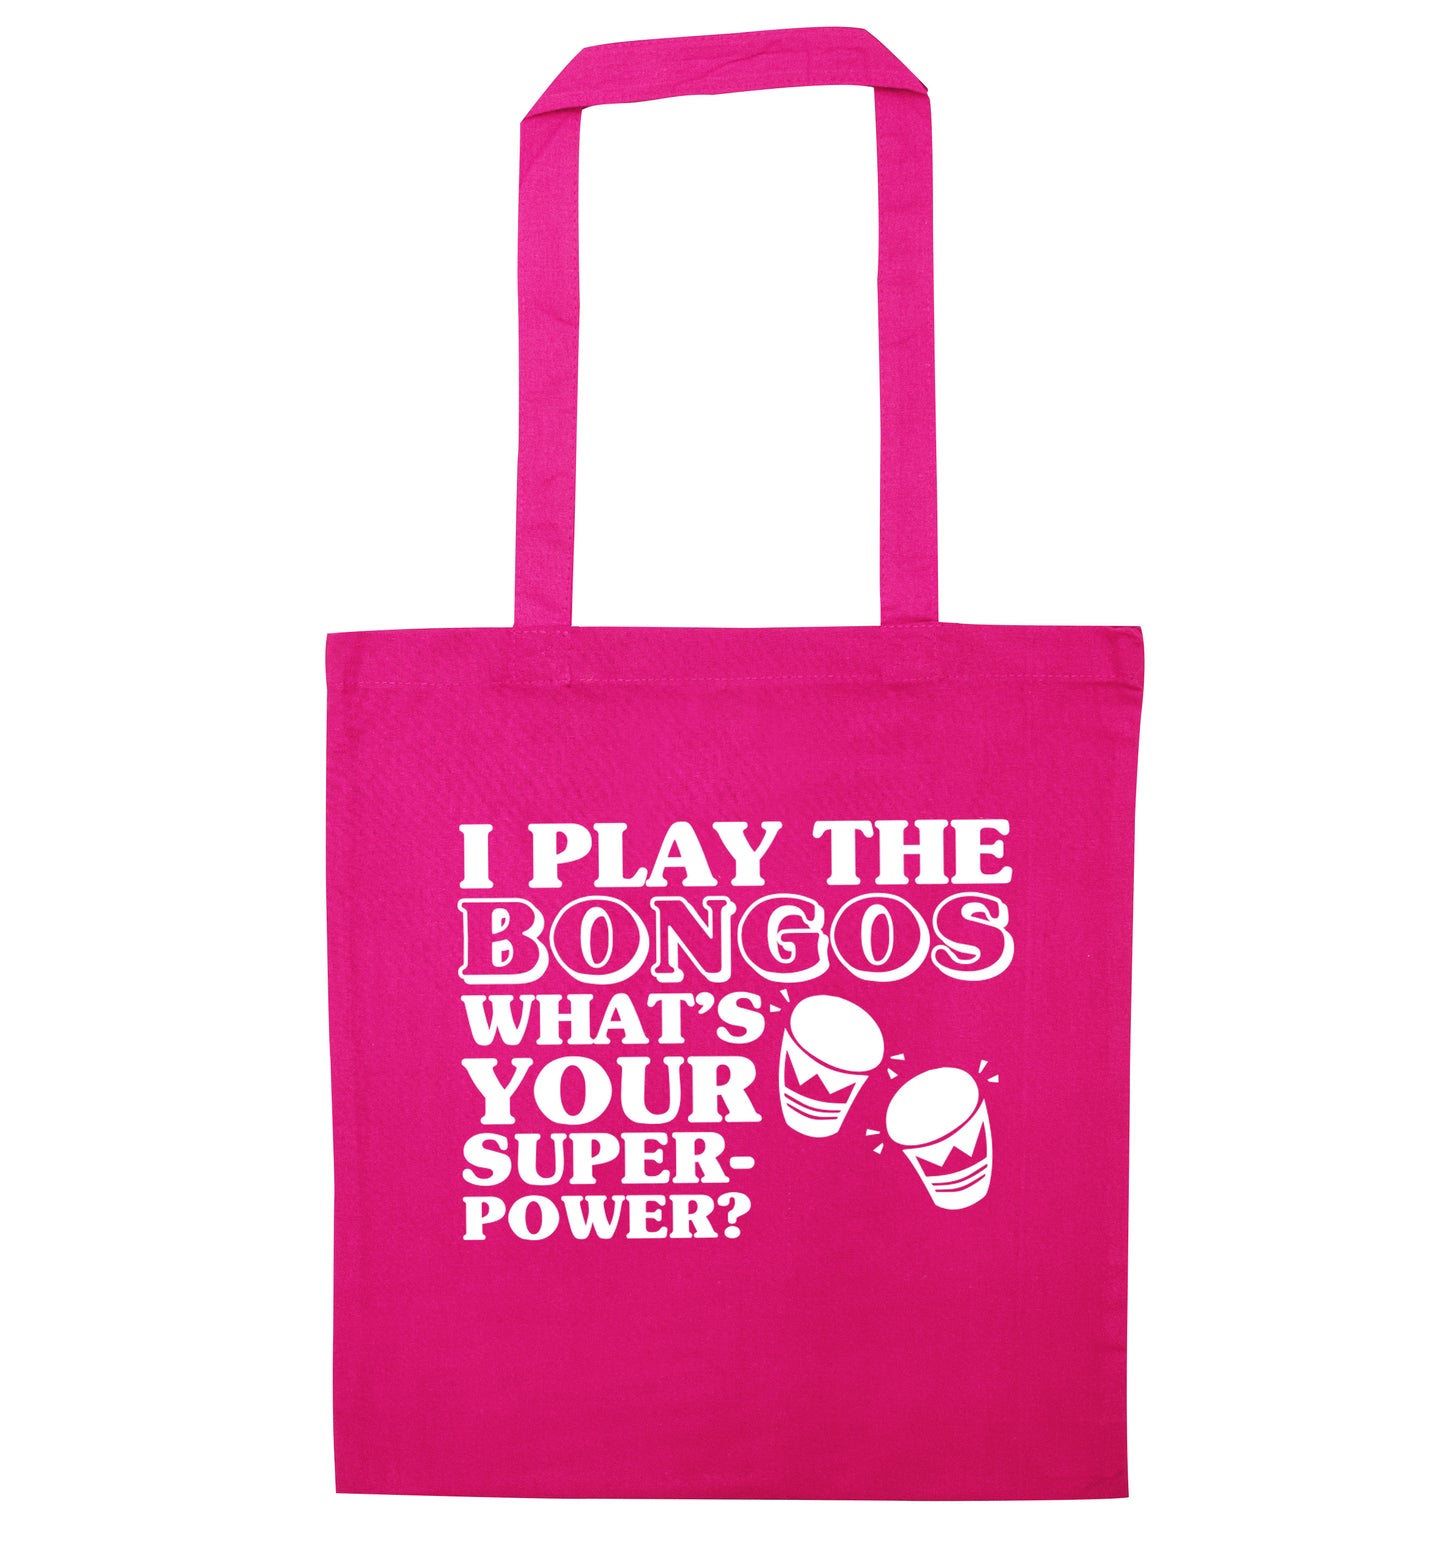 I play the bongos what's your superpower? pink tote bag